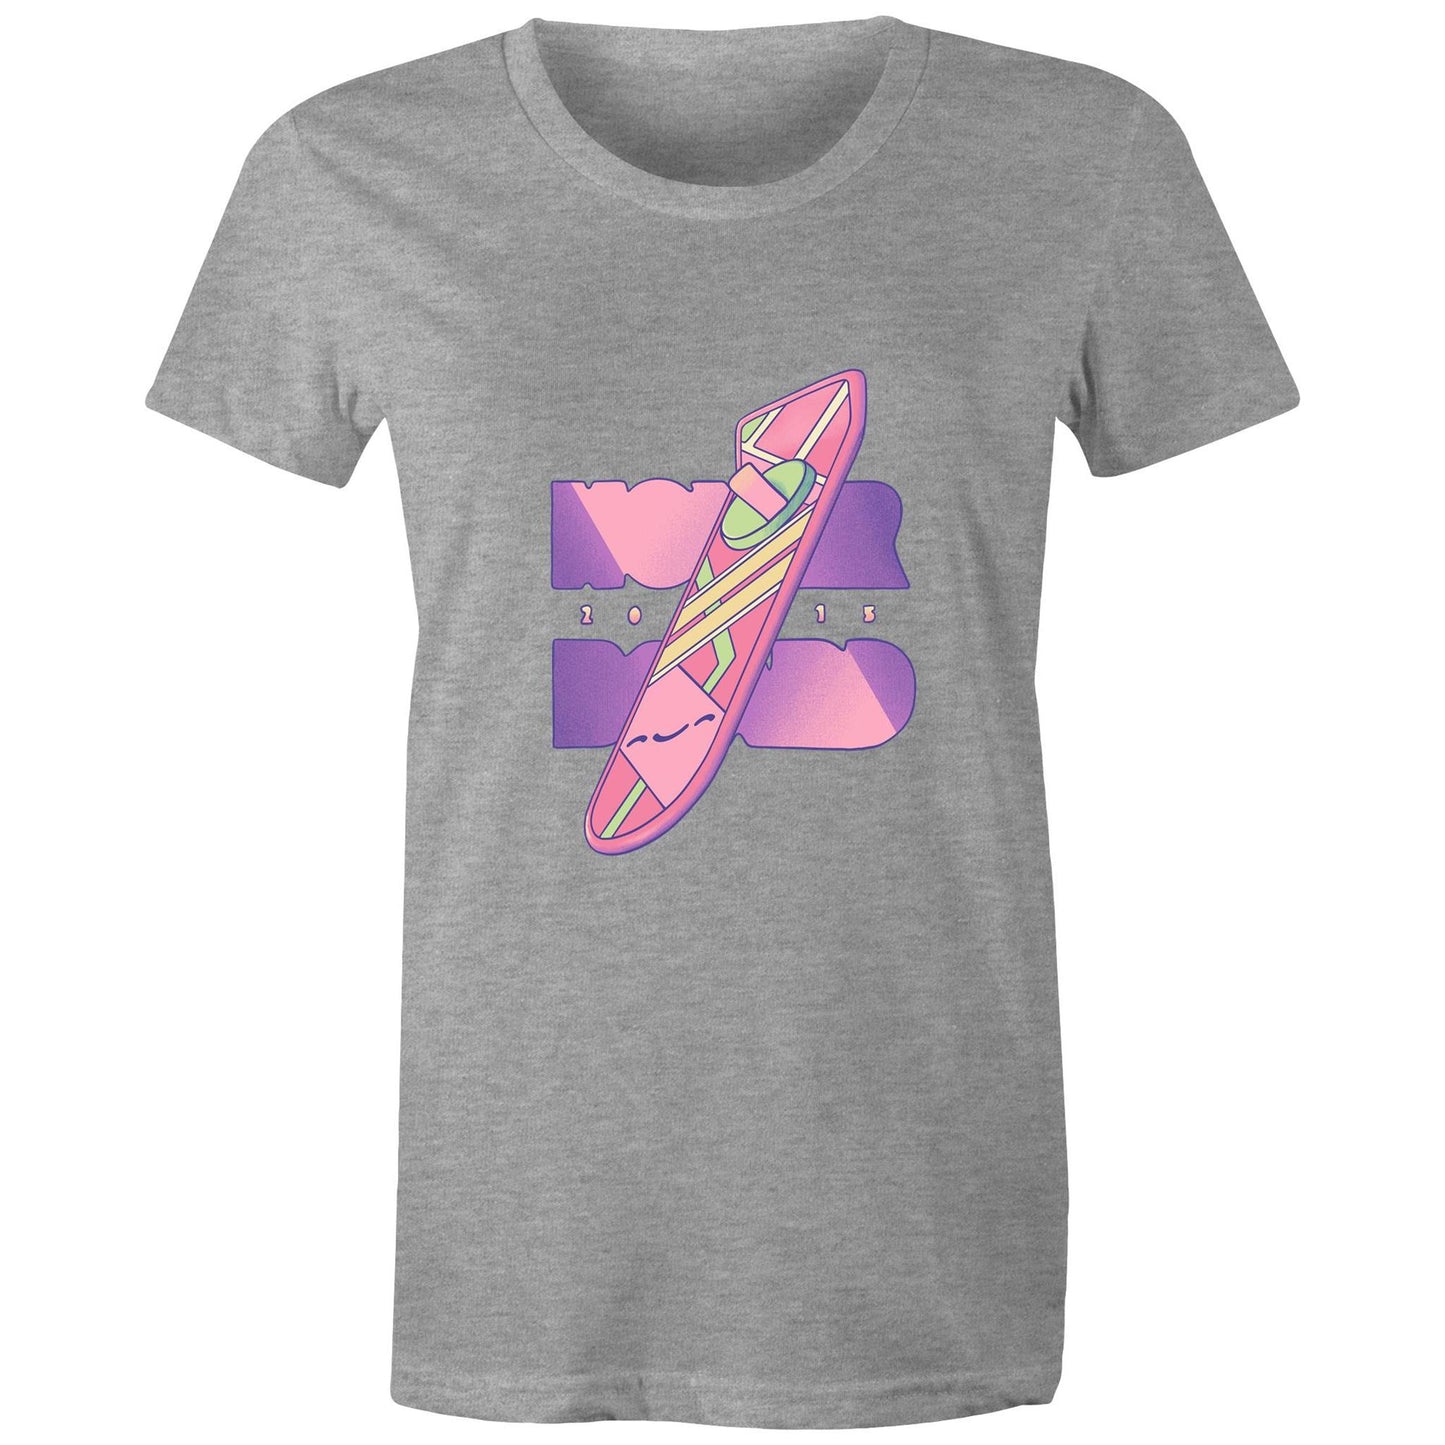 Time to say McFly - Women's Tee